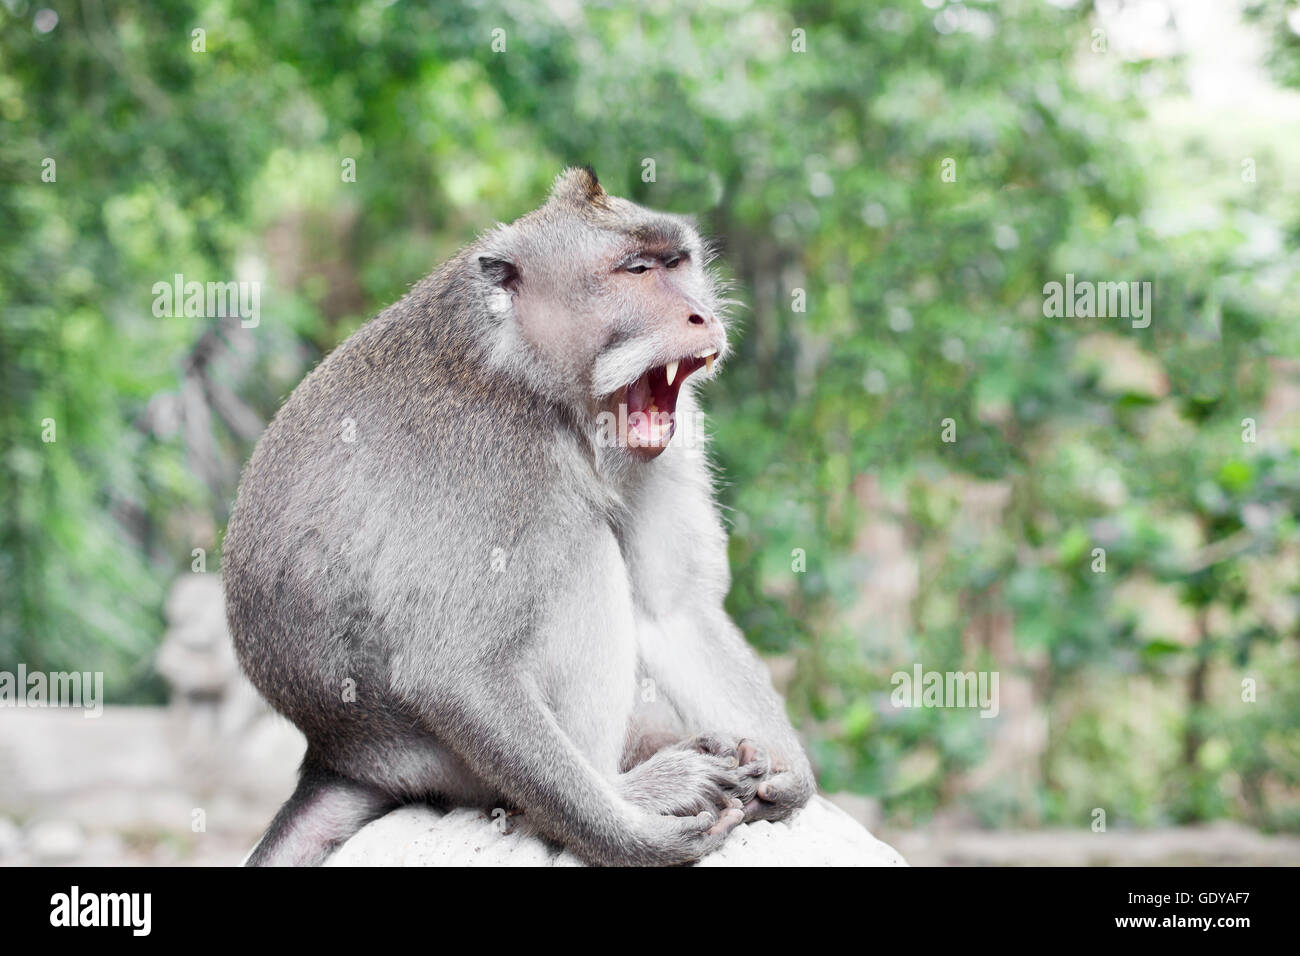 Wildlife Monkey tropical Portrait in the forest Stock Photo